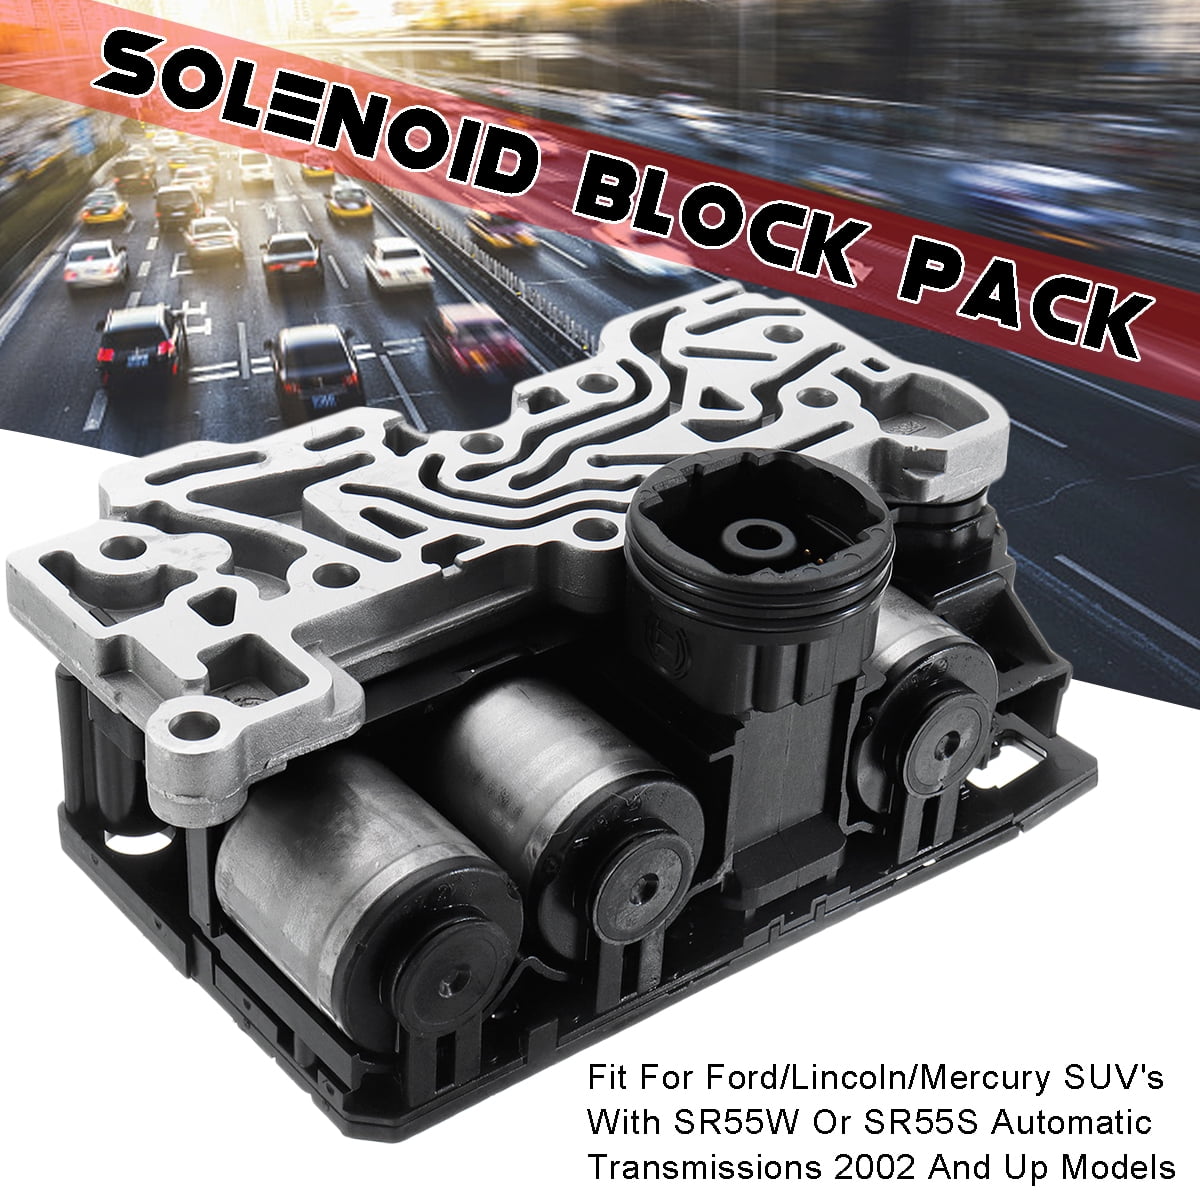 SOLENOID BLOCK PACK UPDATED Fit FOR FORD 5R55S 5R55W EXPLORER MOUNTAINEER EL 